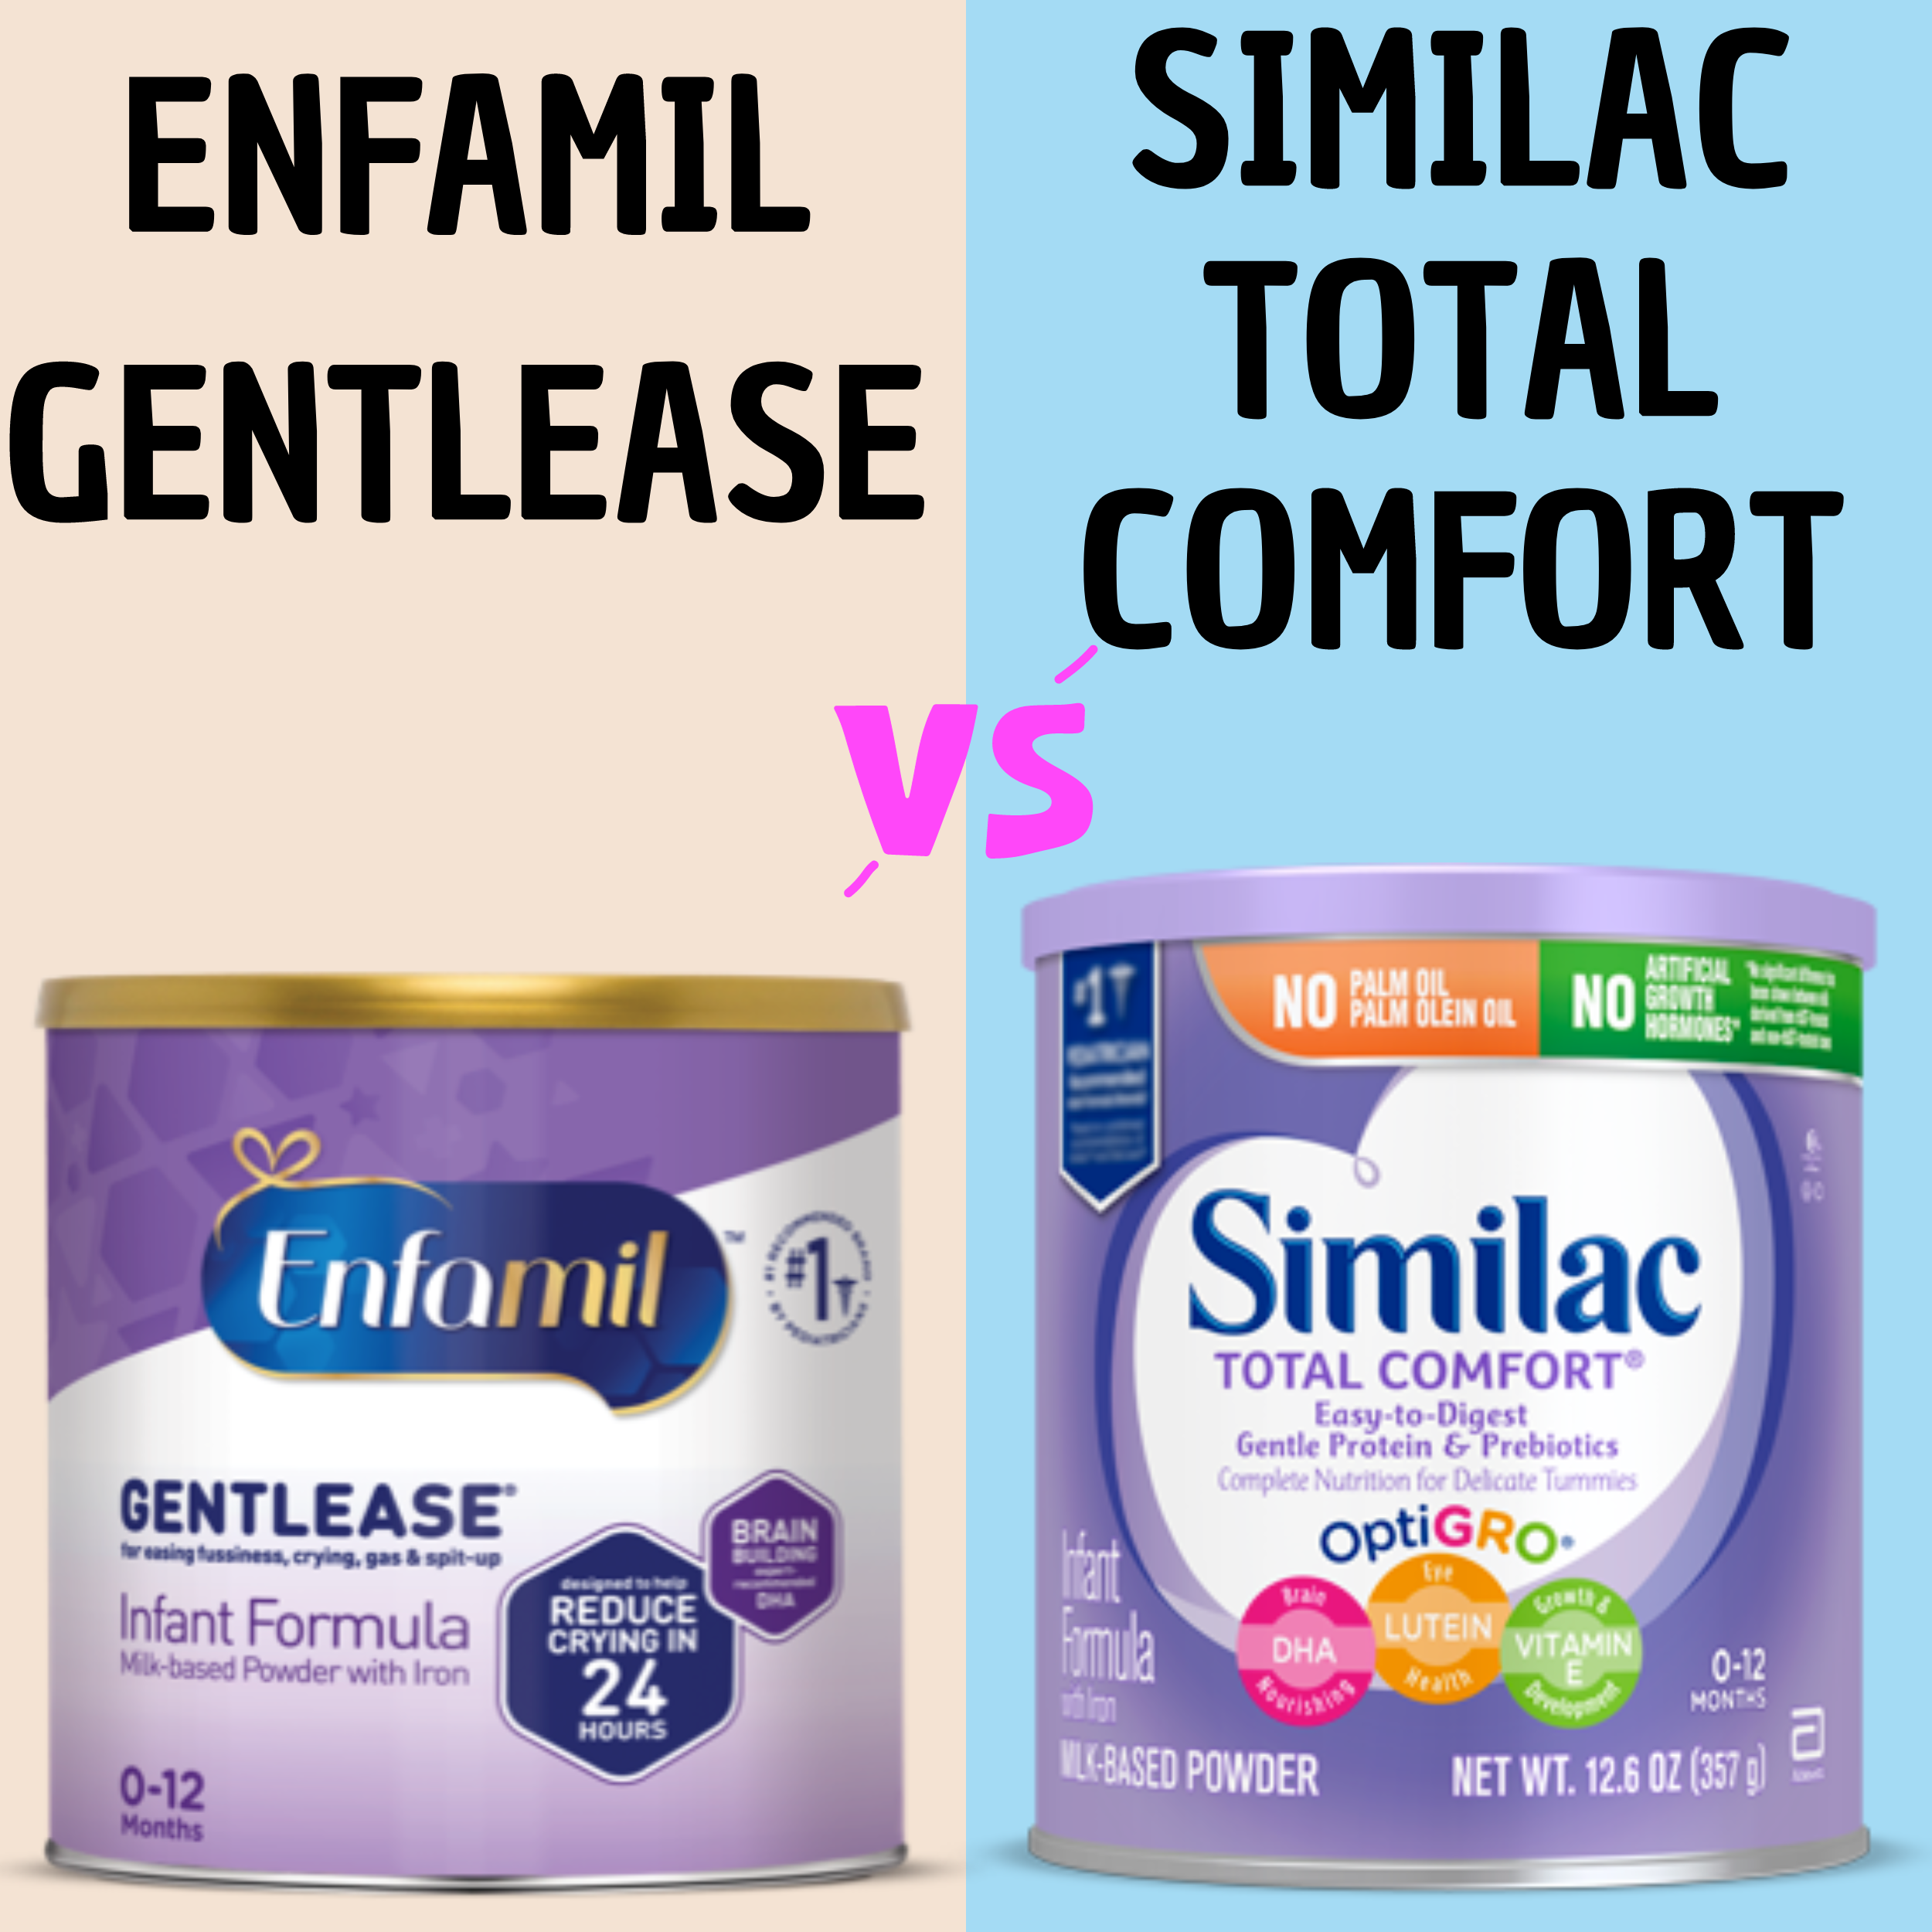 You are currently viewing Similac Total Comfort Vs. Enfamil Gentlease: The Ultimate Comparison